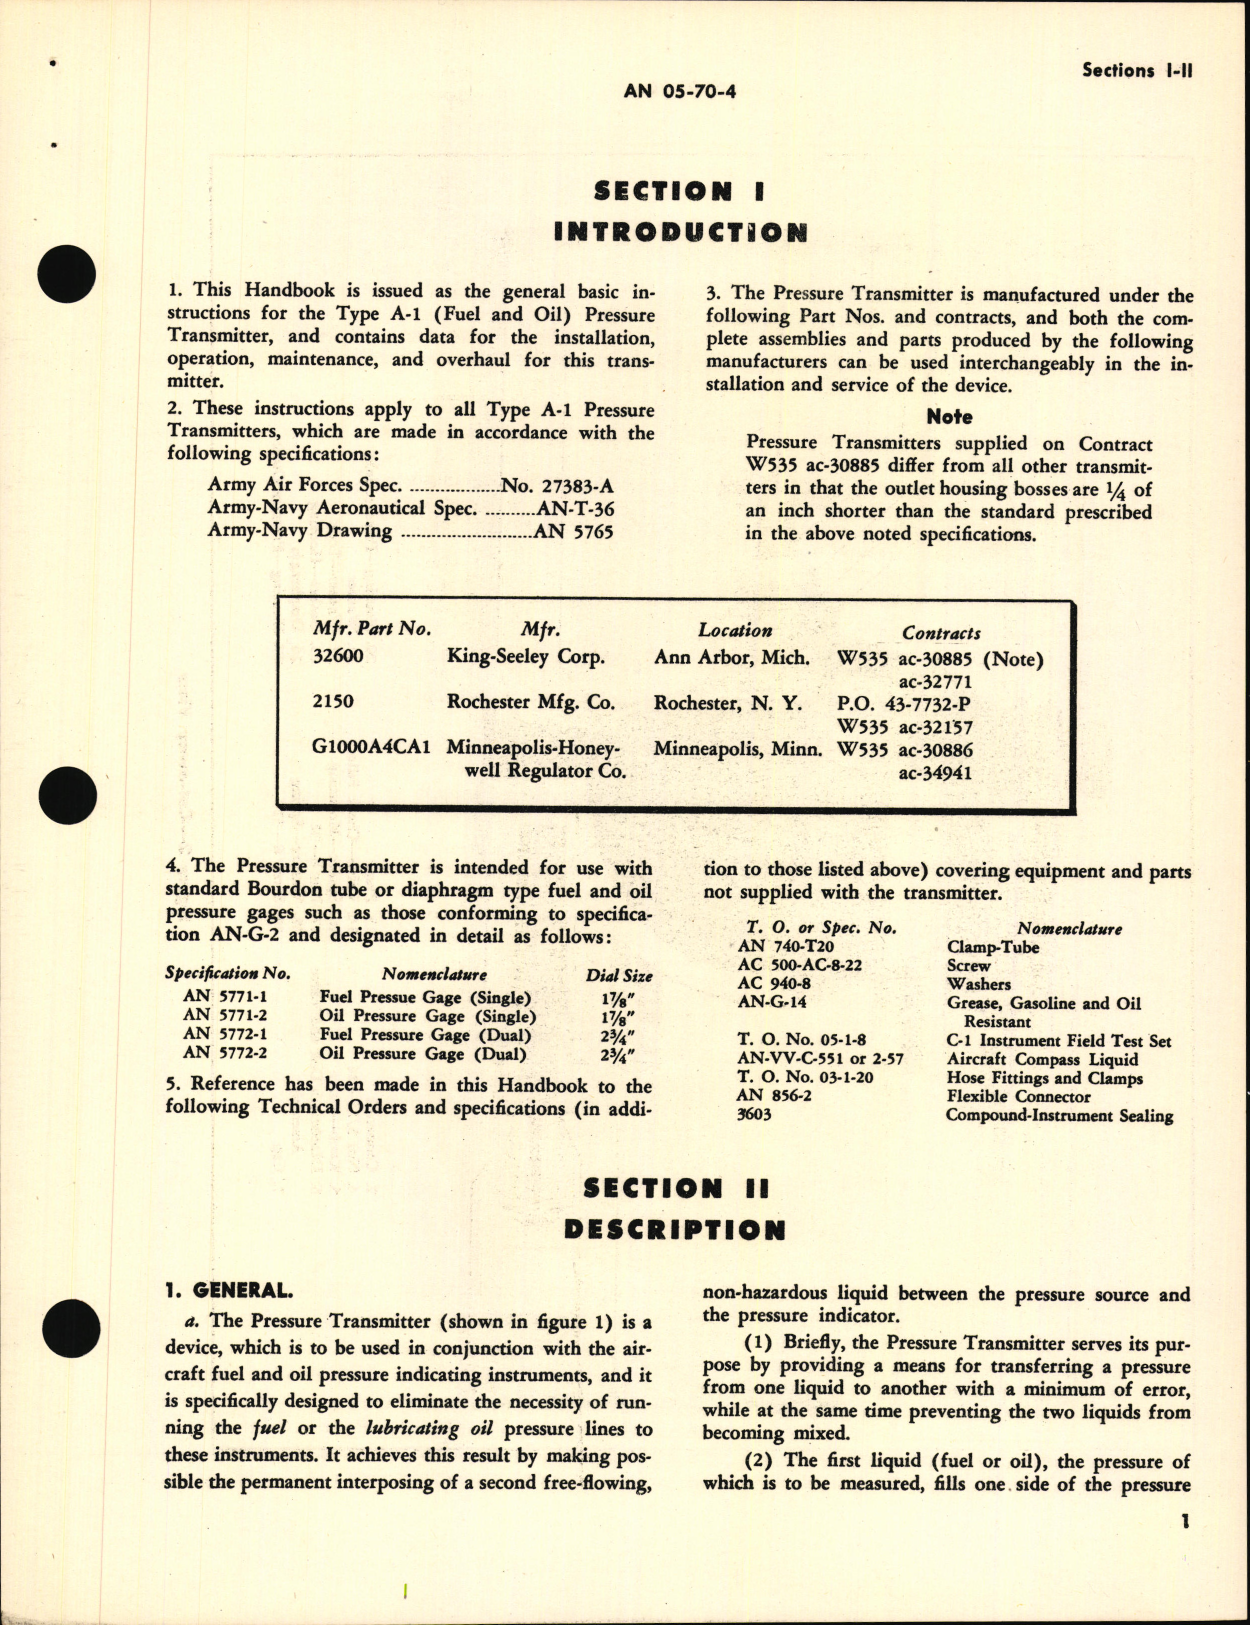 Sample page 5 from AirCorps Library document: Handbook of instructions with Parts Catalog for F.S.S.C. 88-T-2145 and A-1 Pressure Transmitter (Fuel & Oil)